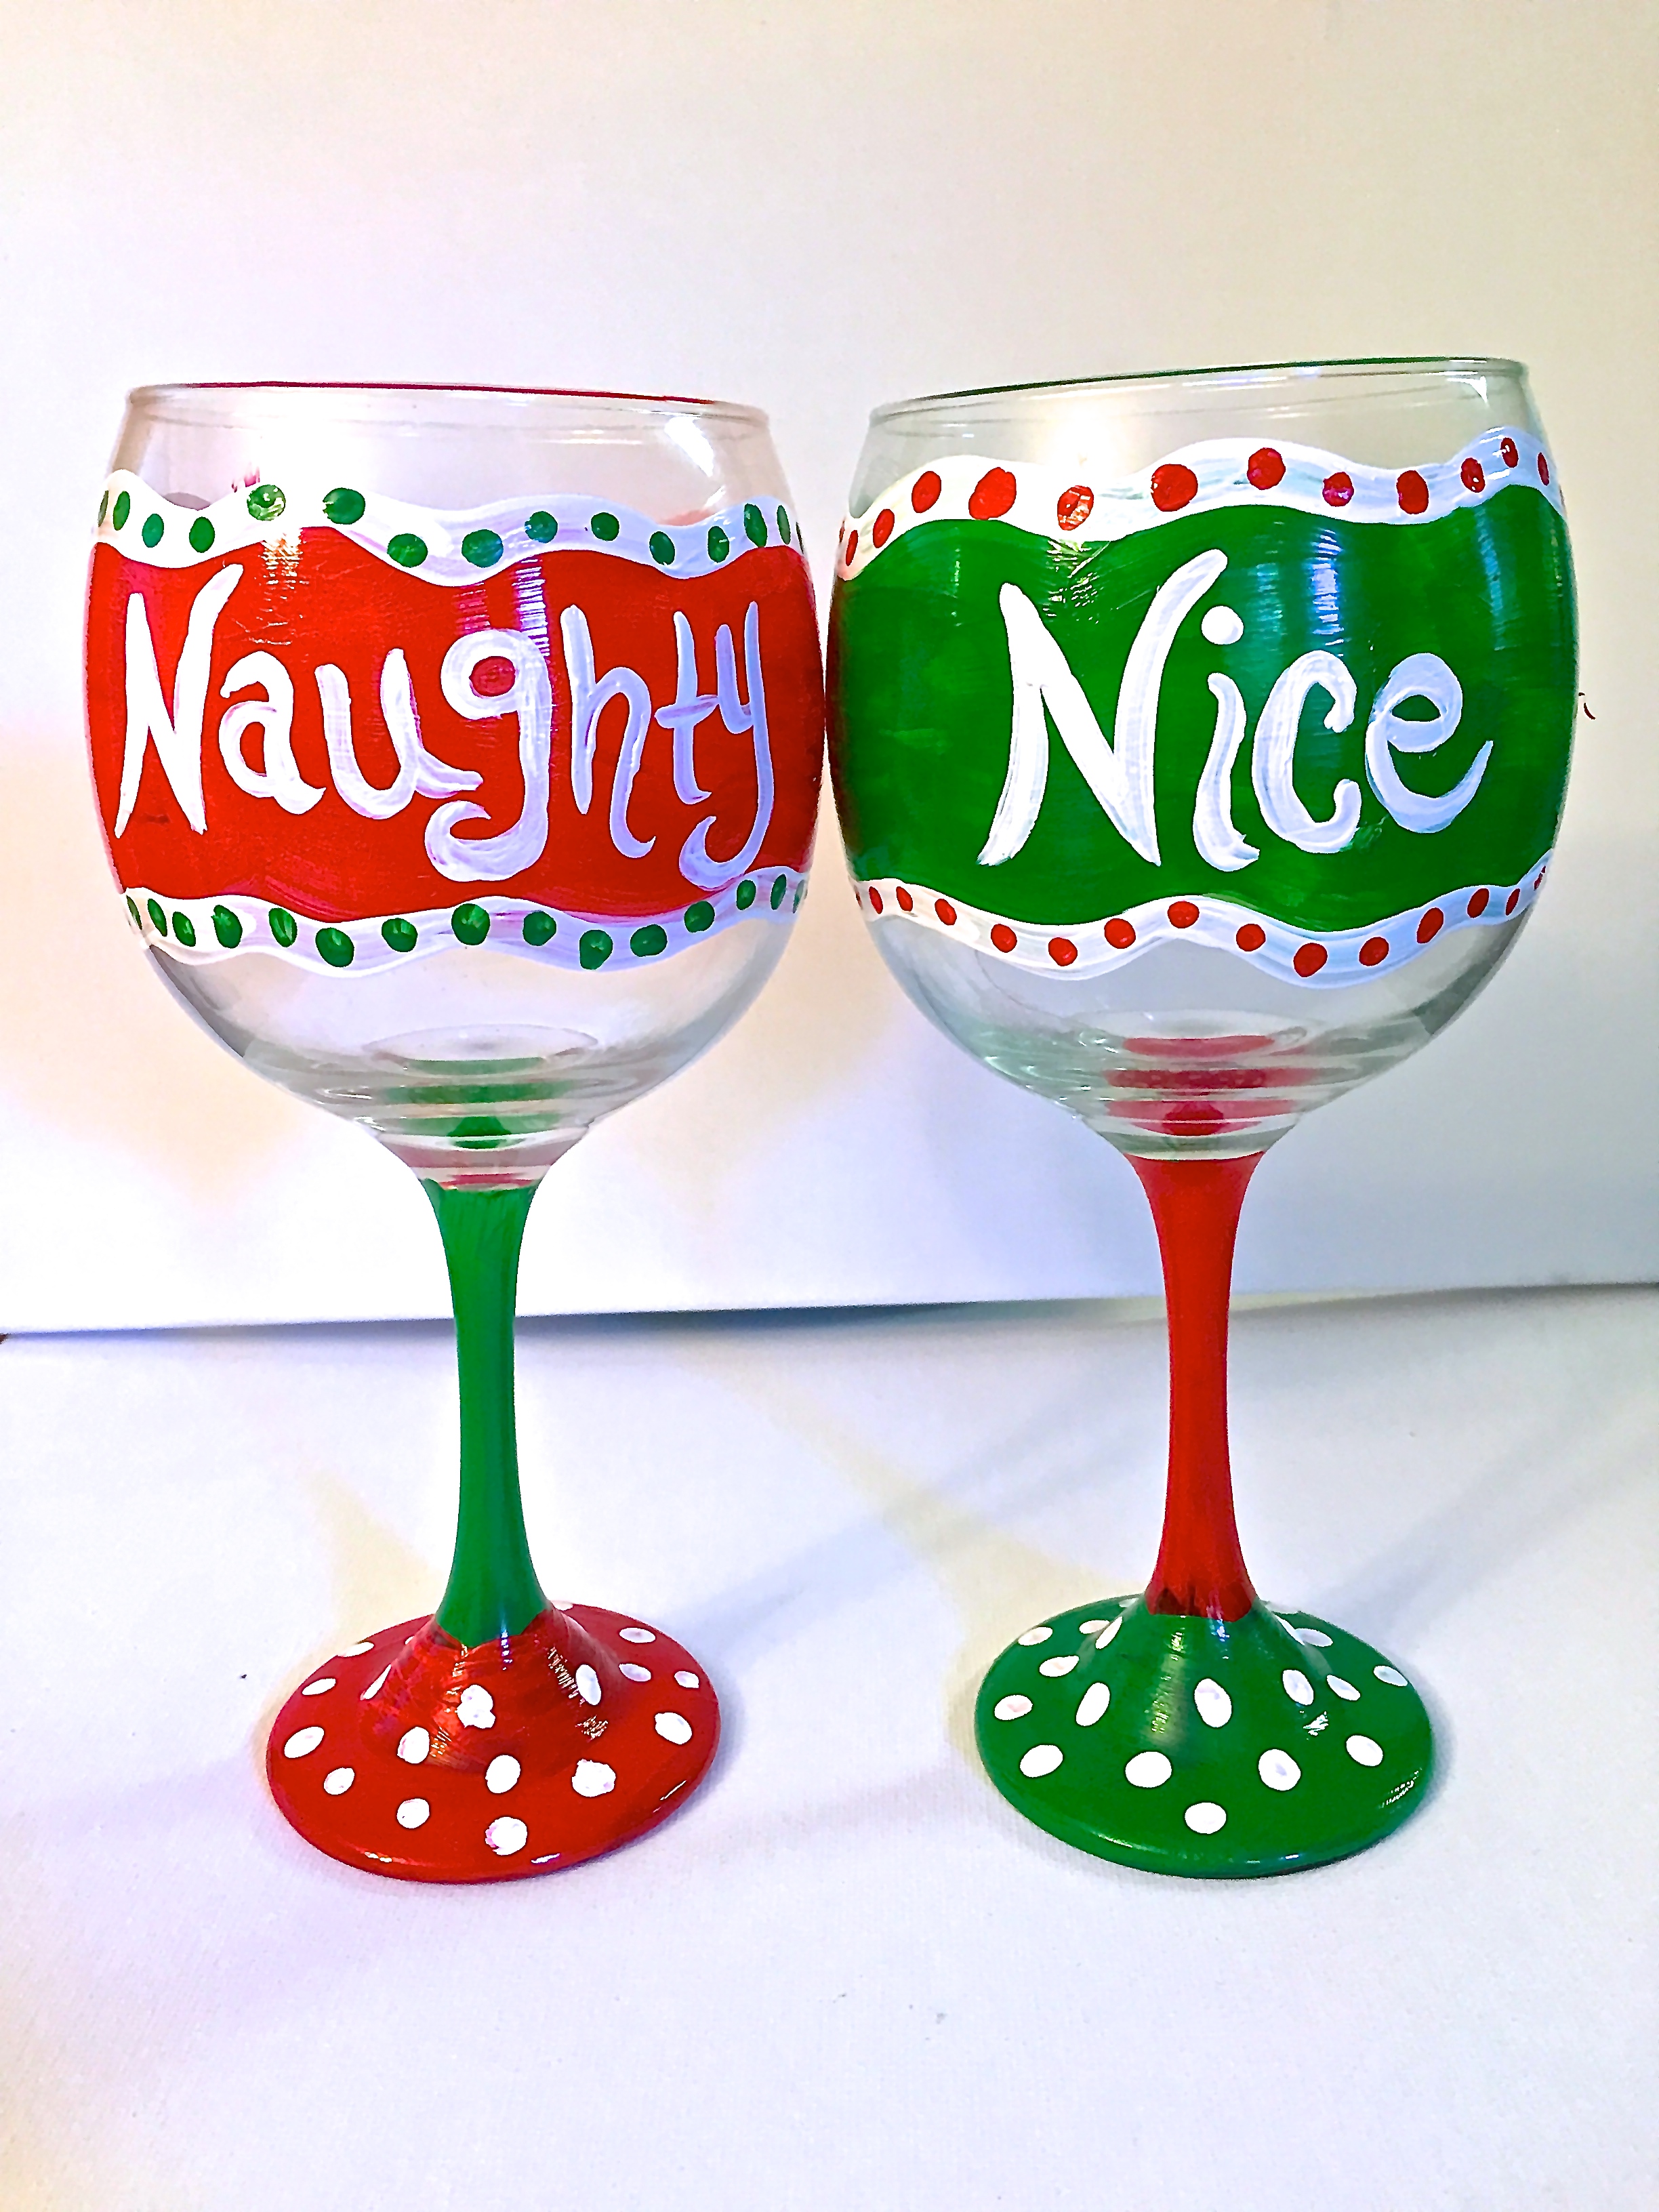 A Naughty and Nice paint nite project by Yaymaker